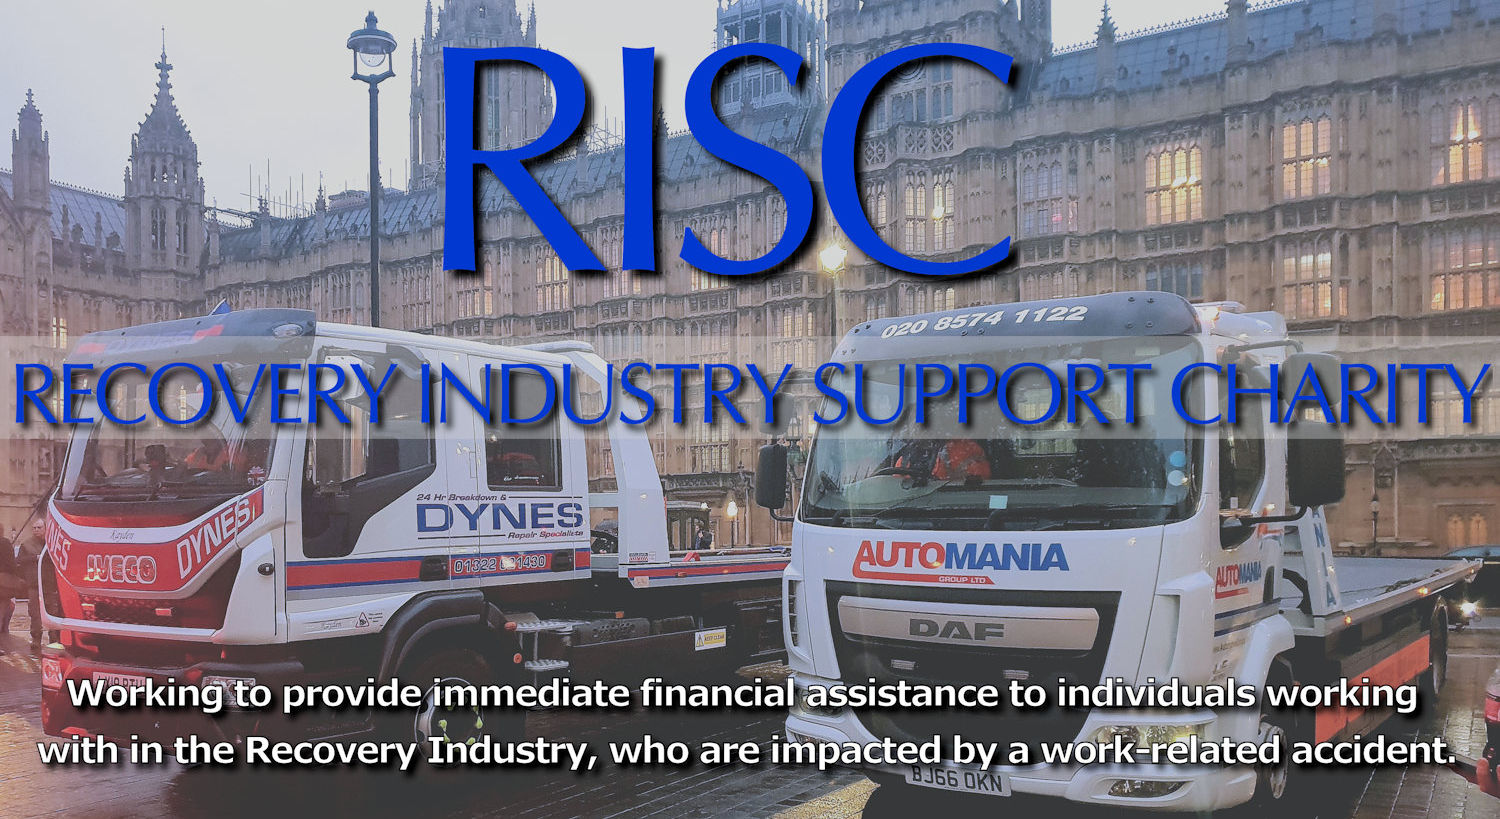 RISC - Recovery Industry Support Charity